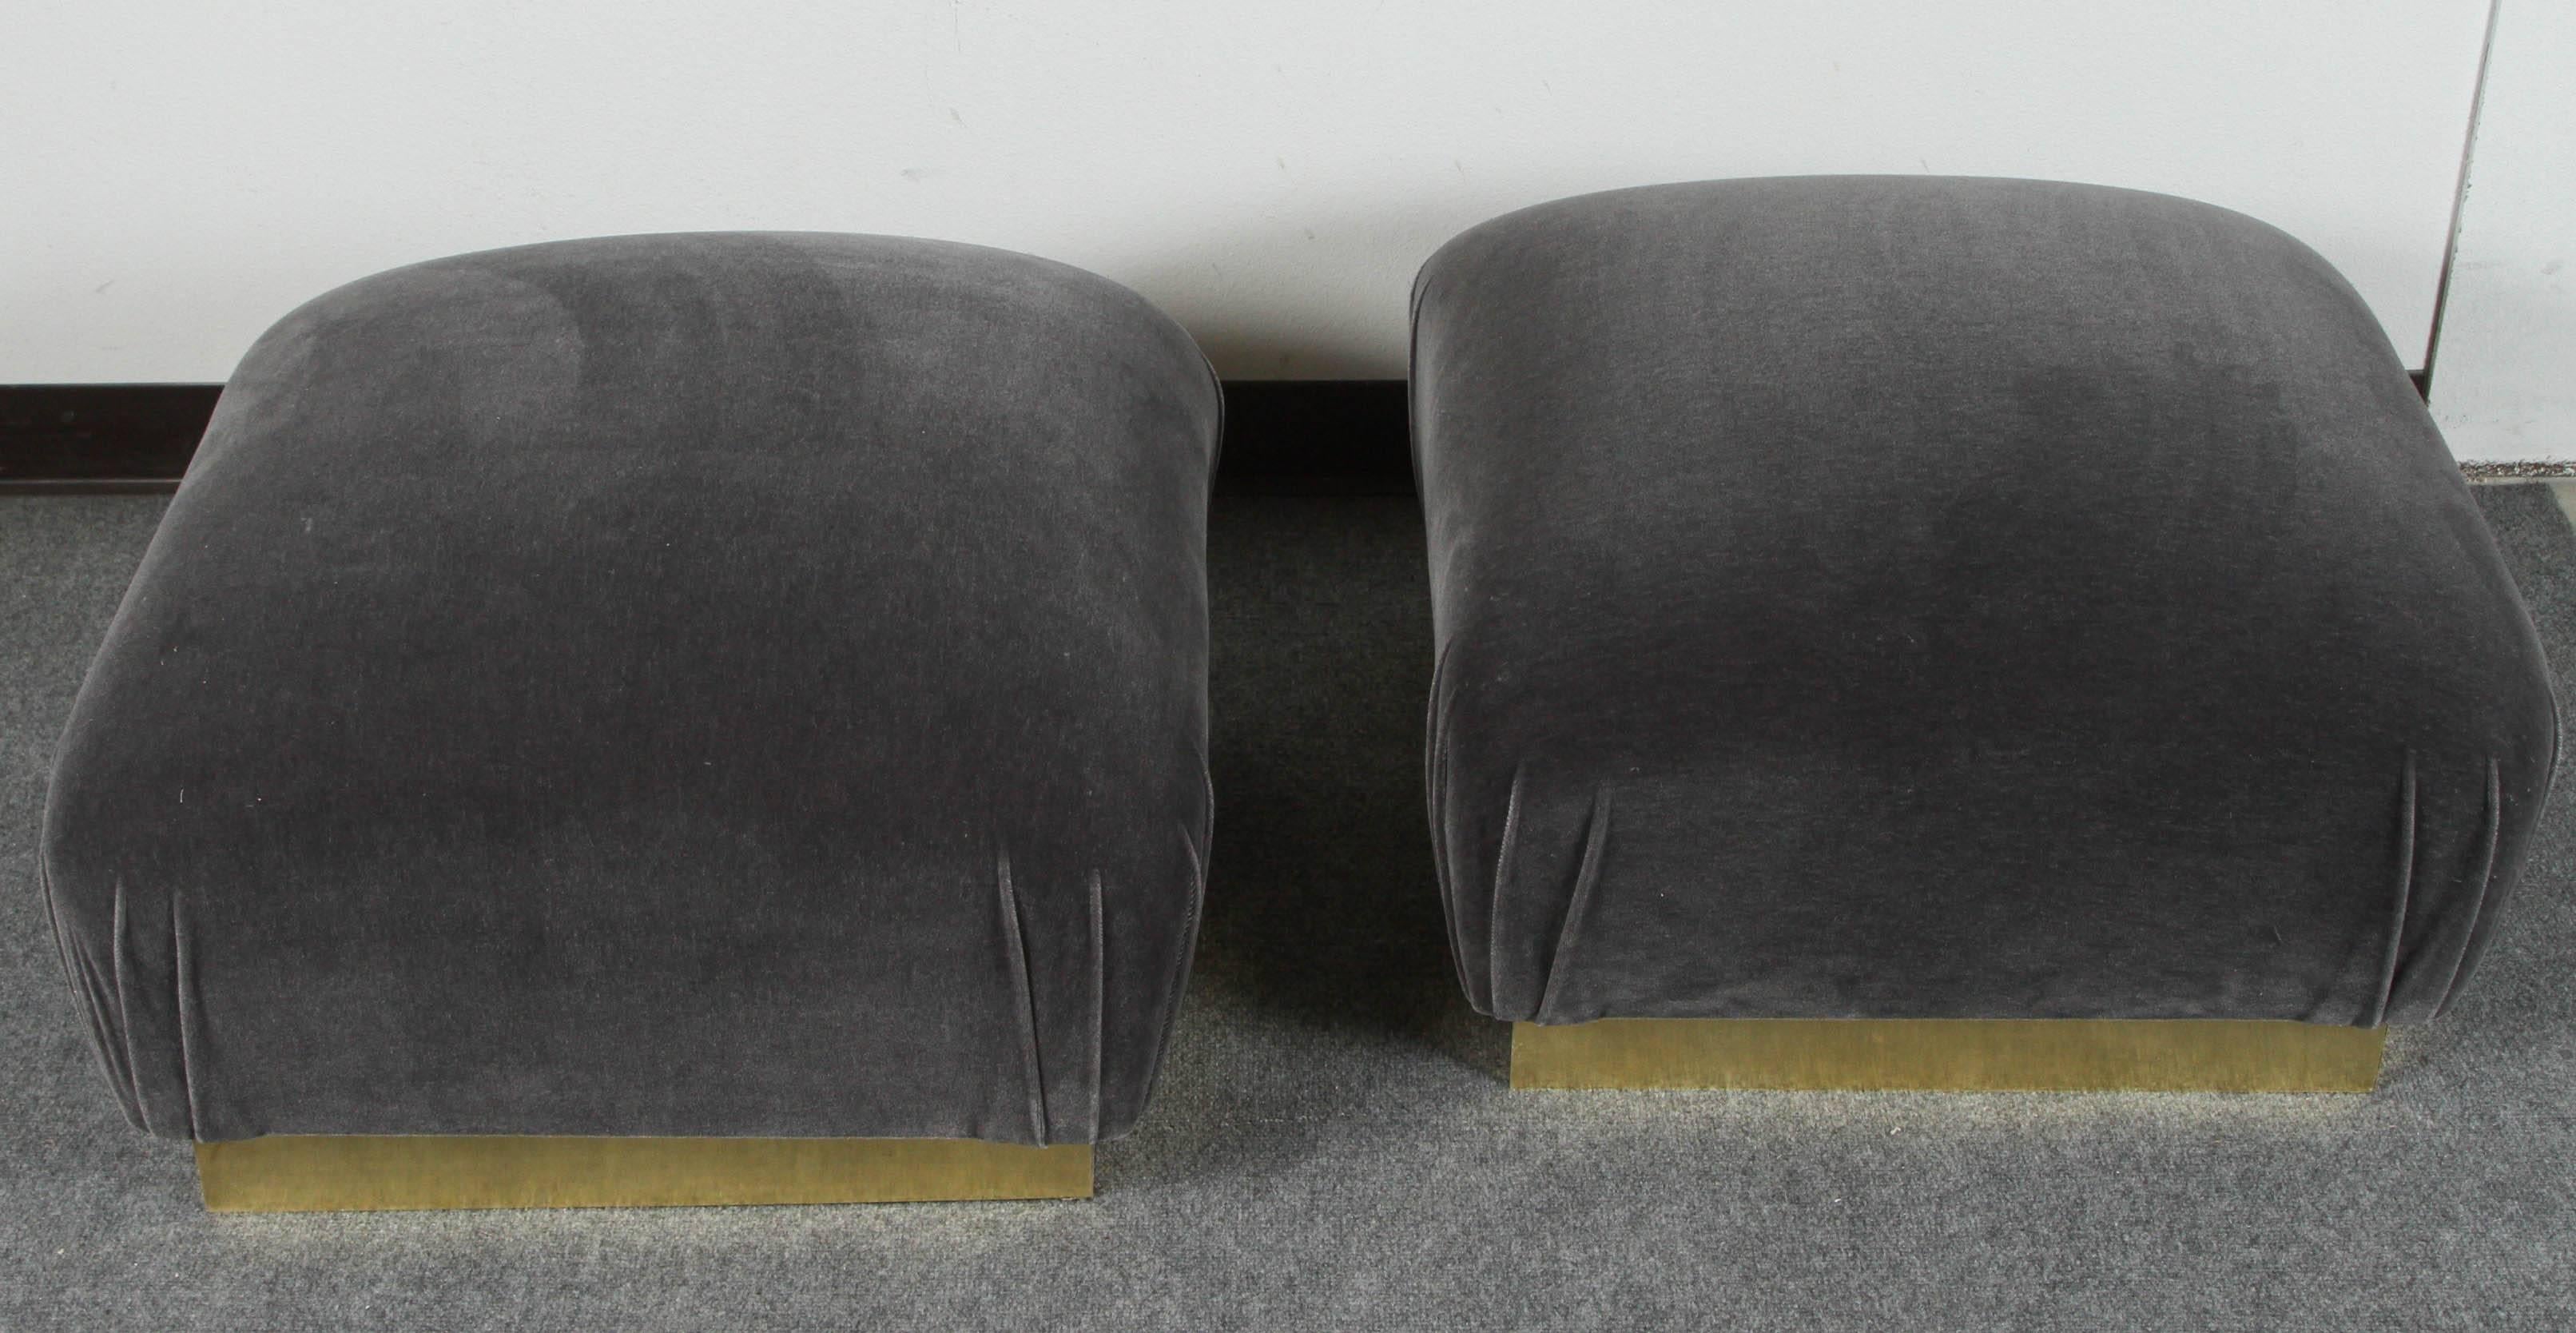 Pair of pouf ottomans by Steve Chase. They are upholstered in a grey mohair velvet and the brass trim gives them a tailored appearance.